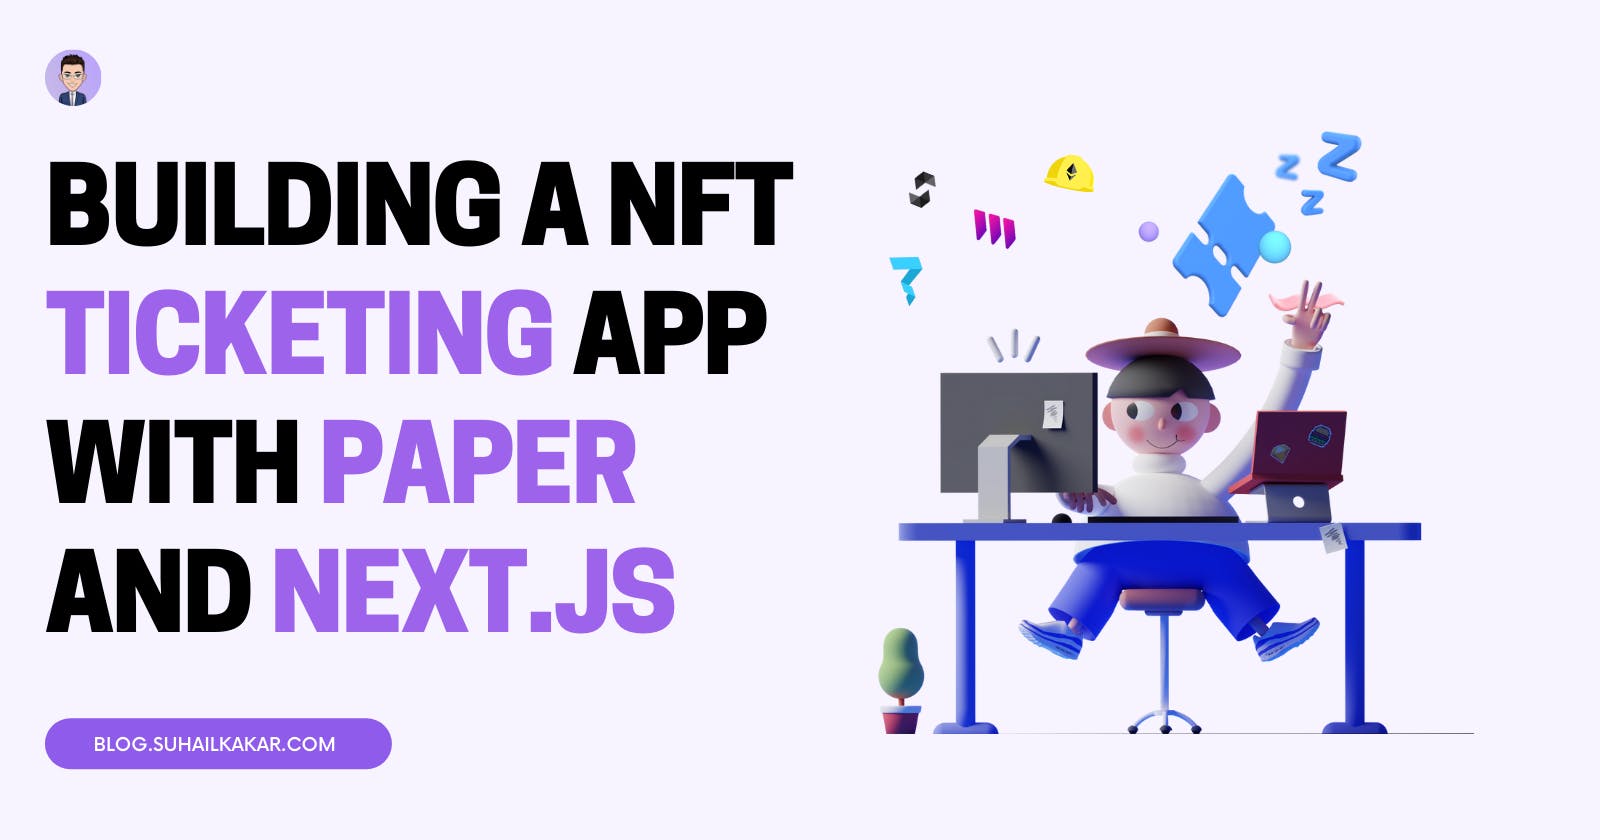 Building a NFT Ticketing app with Paper and Next.js